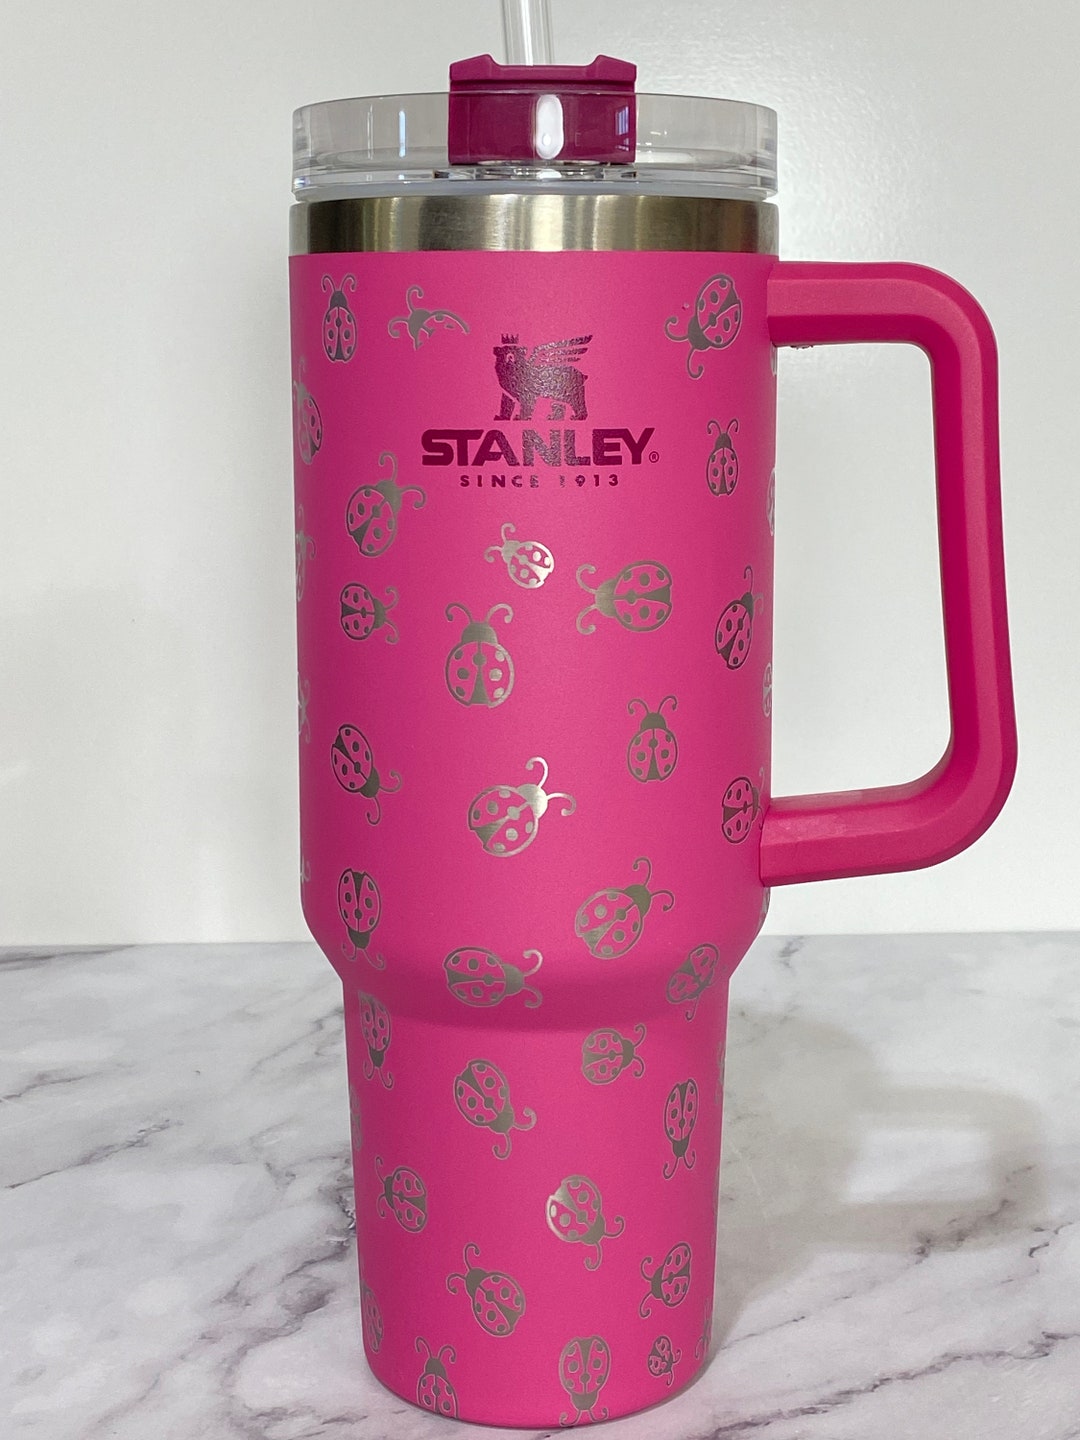 Stanley Tumbler With Sunflower Engrave - Stanley Tumbler - Stylish Stanley  Tumbler - Pink Barbie Citron Dye Tie